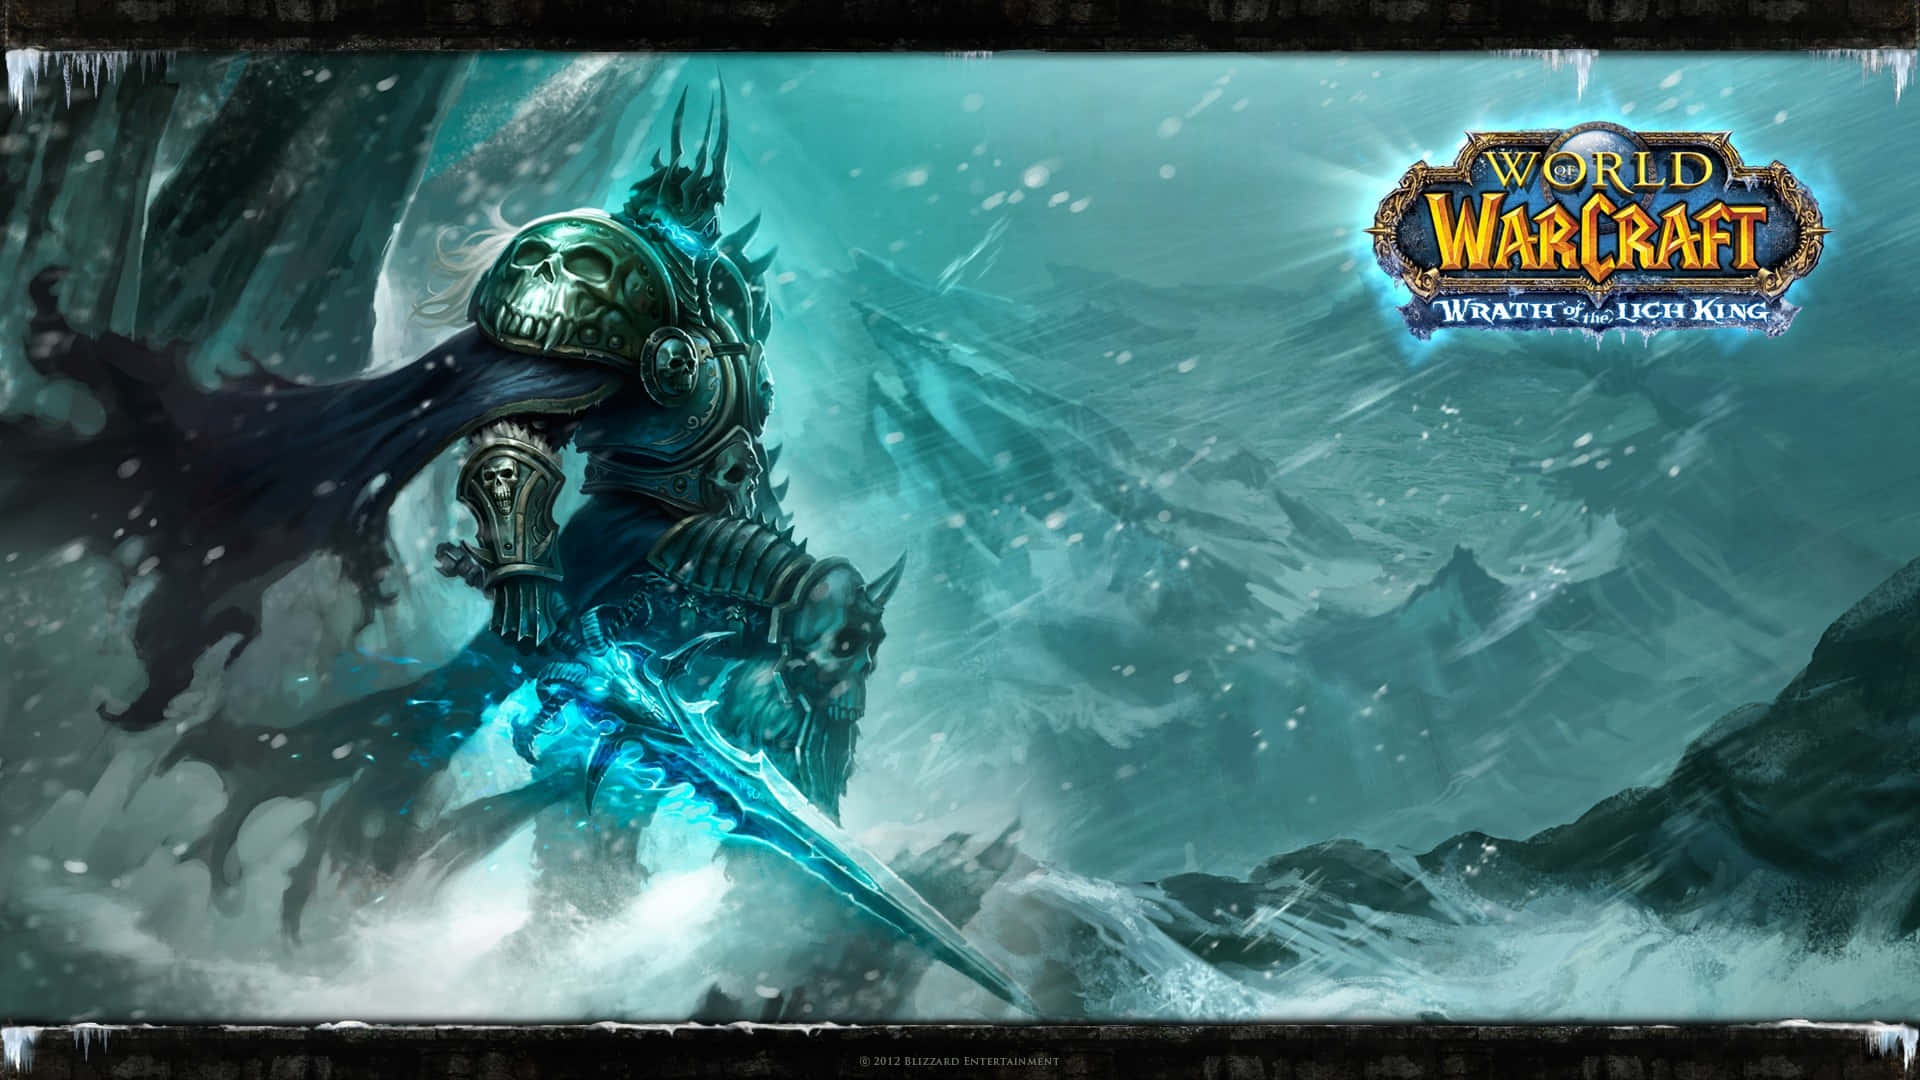 Immerse yourself in the magical world of World Of Warcraft. Wallpaper